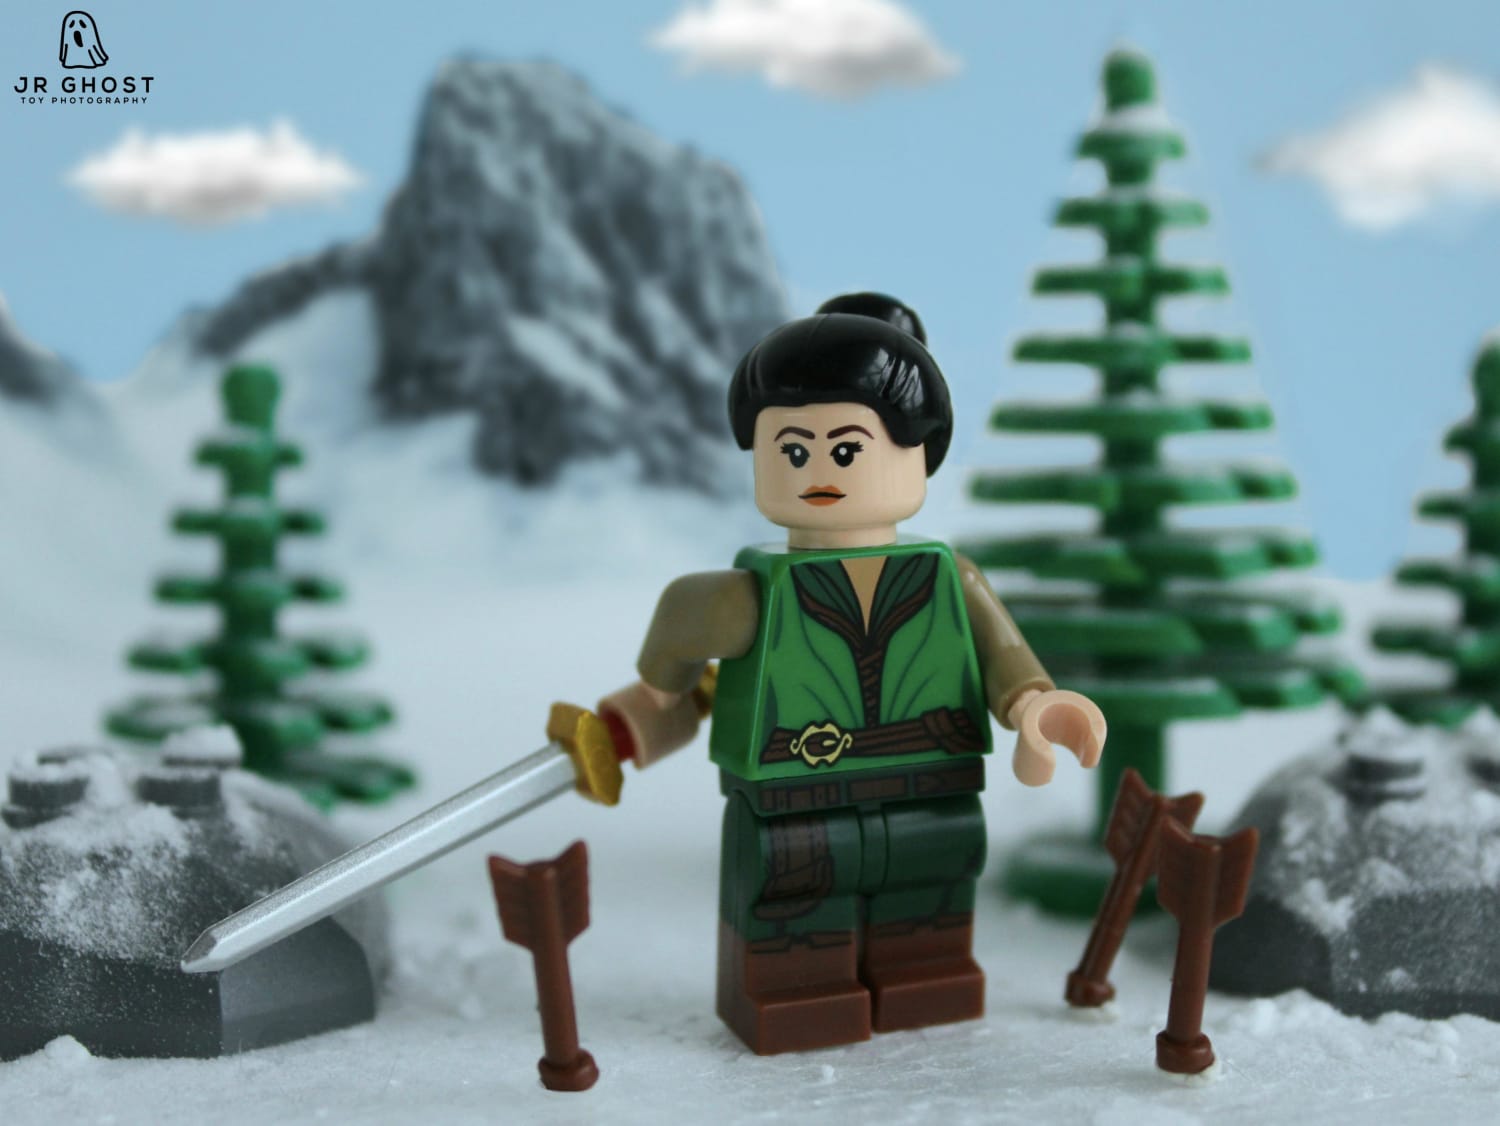 Couldn't find a LEGO Mulan minifigure so I made my own